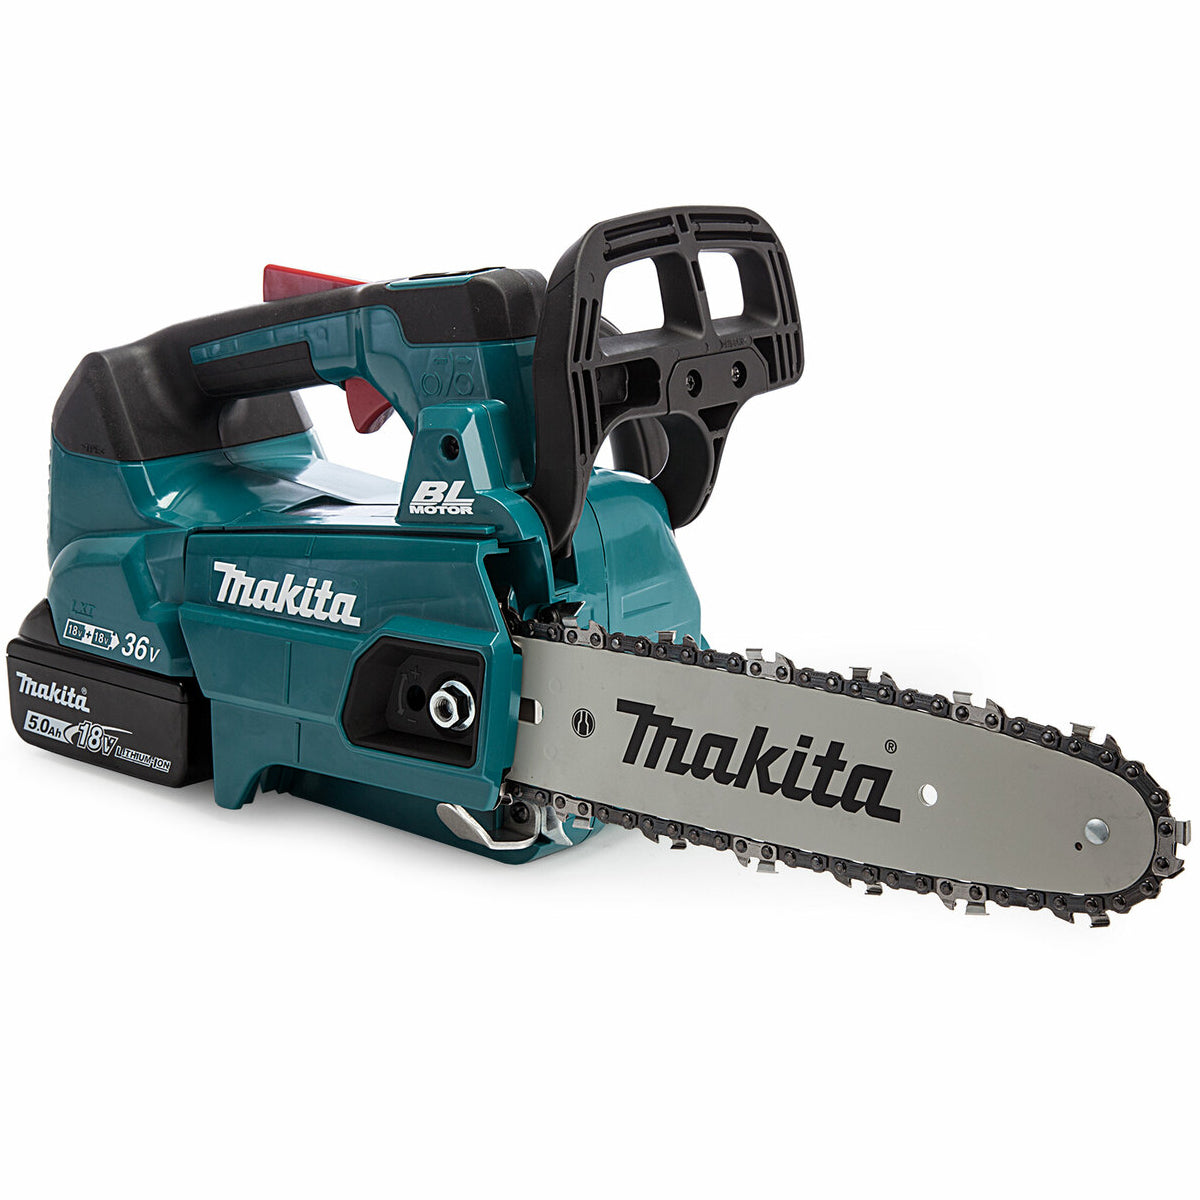 Makita DUC256PT2 36V Brushless Chainsaw 25cm with 2 x 5.0Ah Batteries & Charger